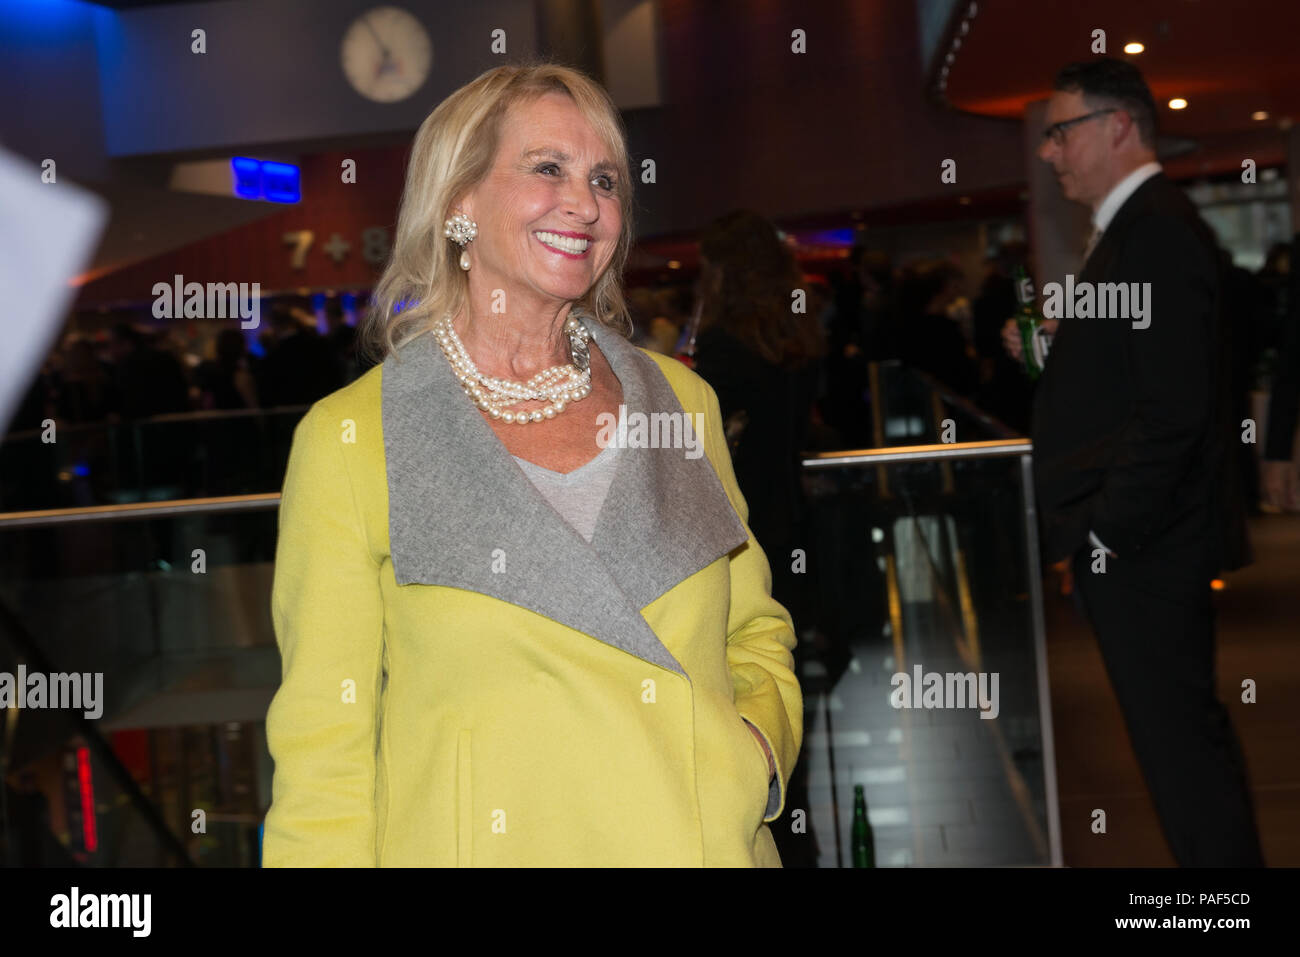 Actress Diana Körner seen at the opening ceremony of Filmfest München 2018 Stock Photo